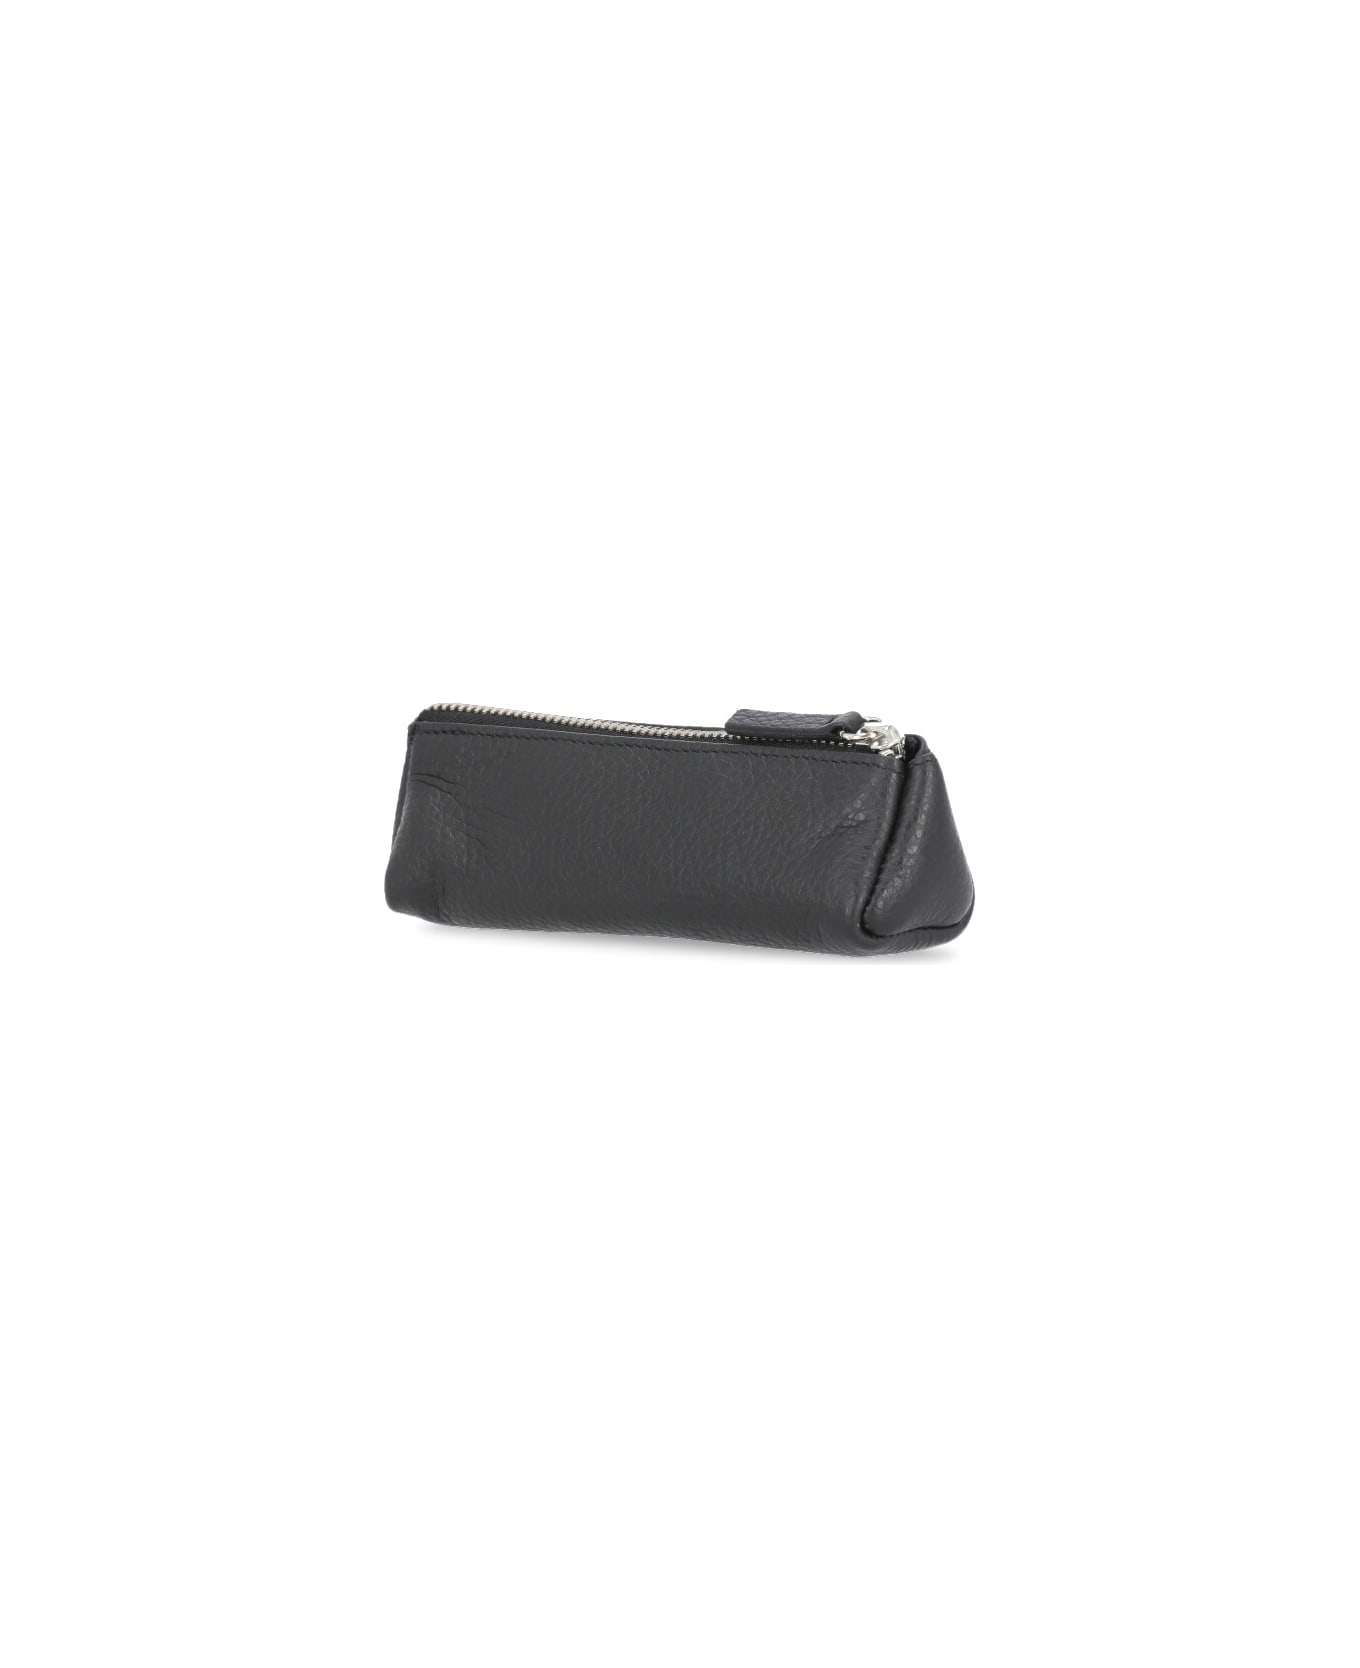 Orciani Micron Leather Coin Case - Black 財布